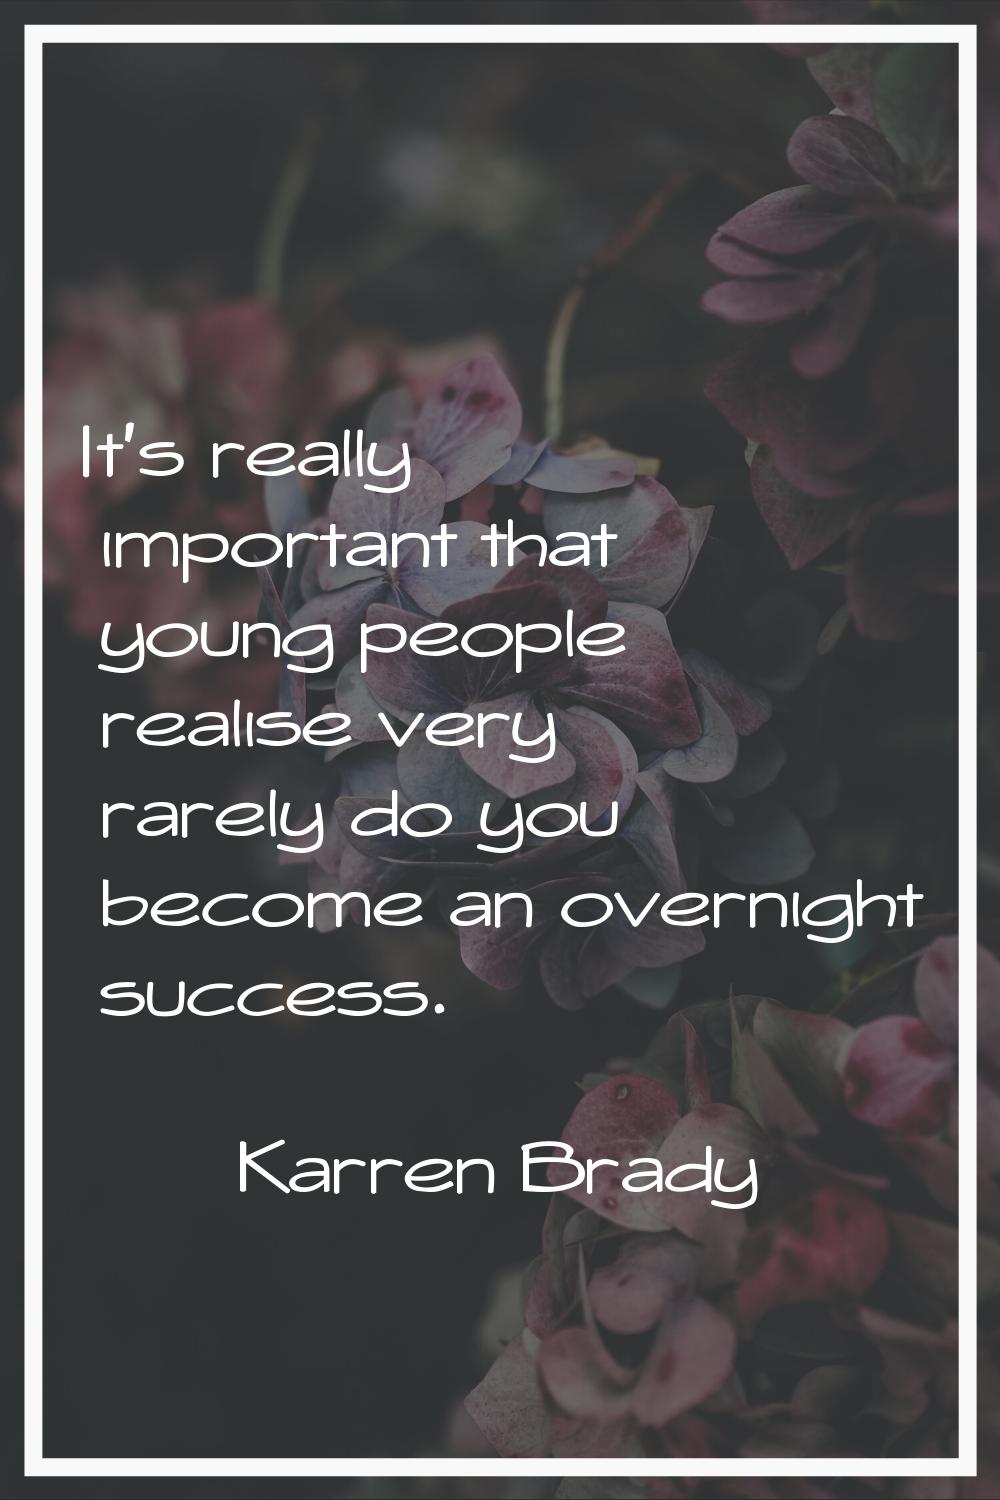 It's really important that young people realise very rarely do you become an overnight success.